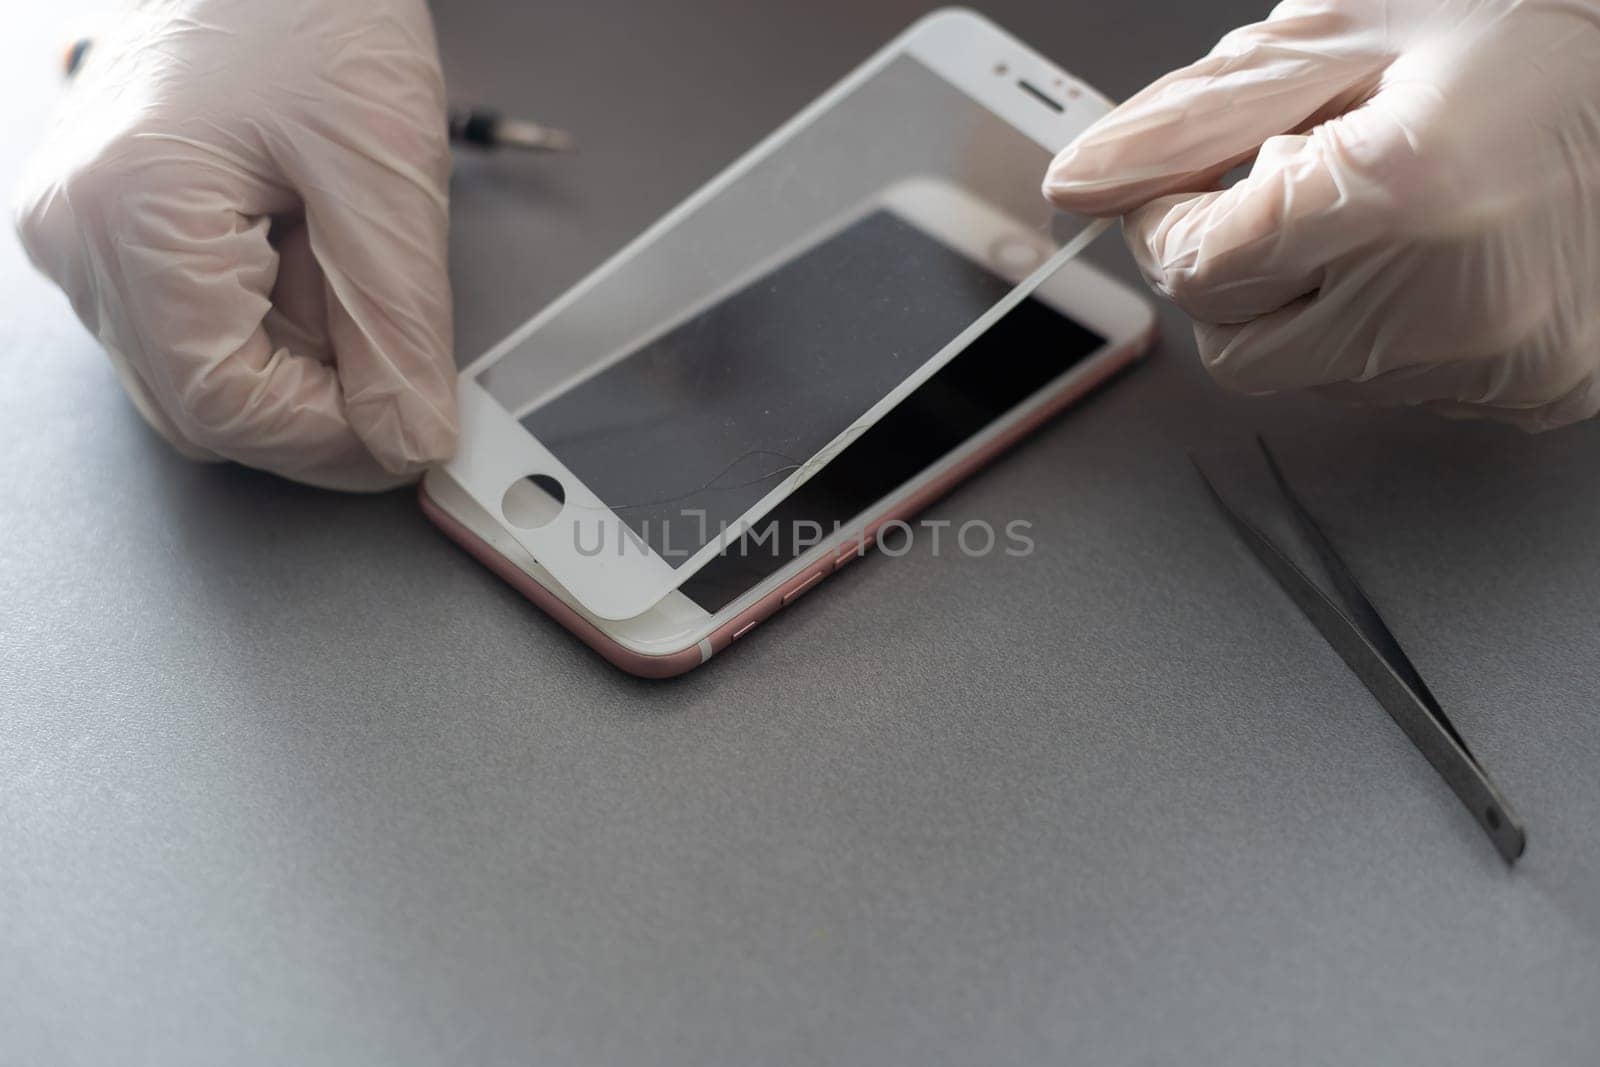 a person places a protective glass or film on a smartphone. copy space. by Andelov13